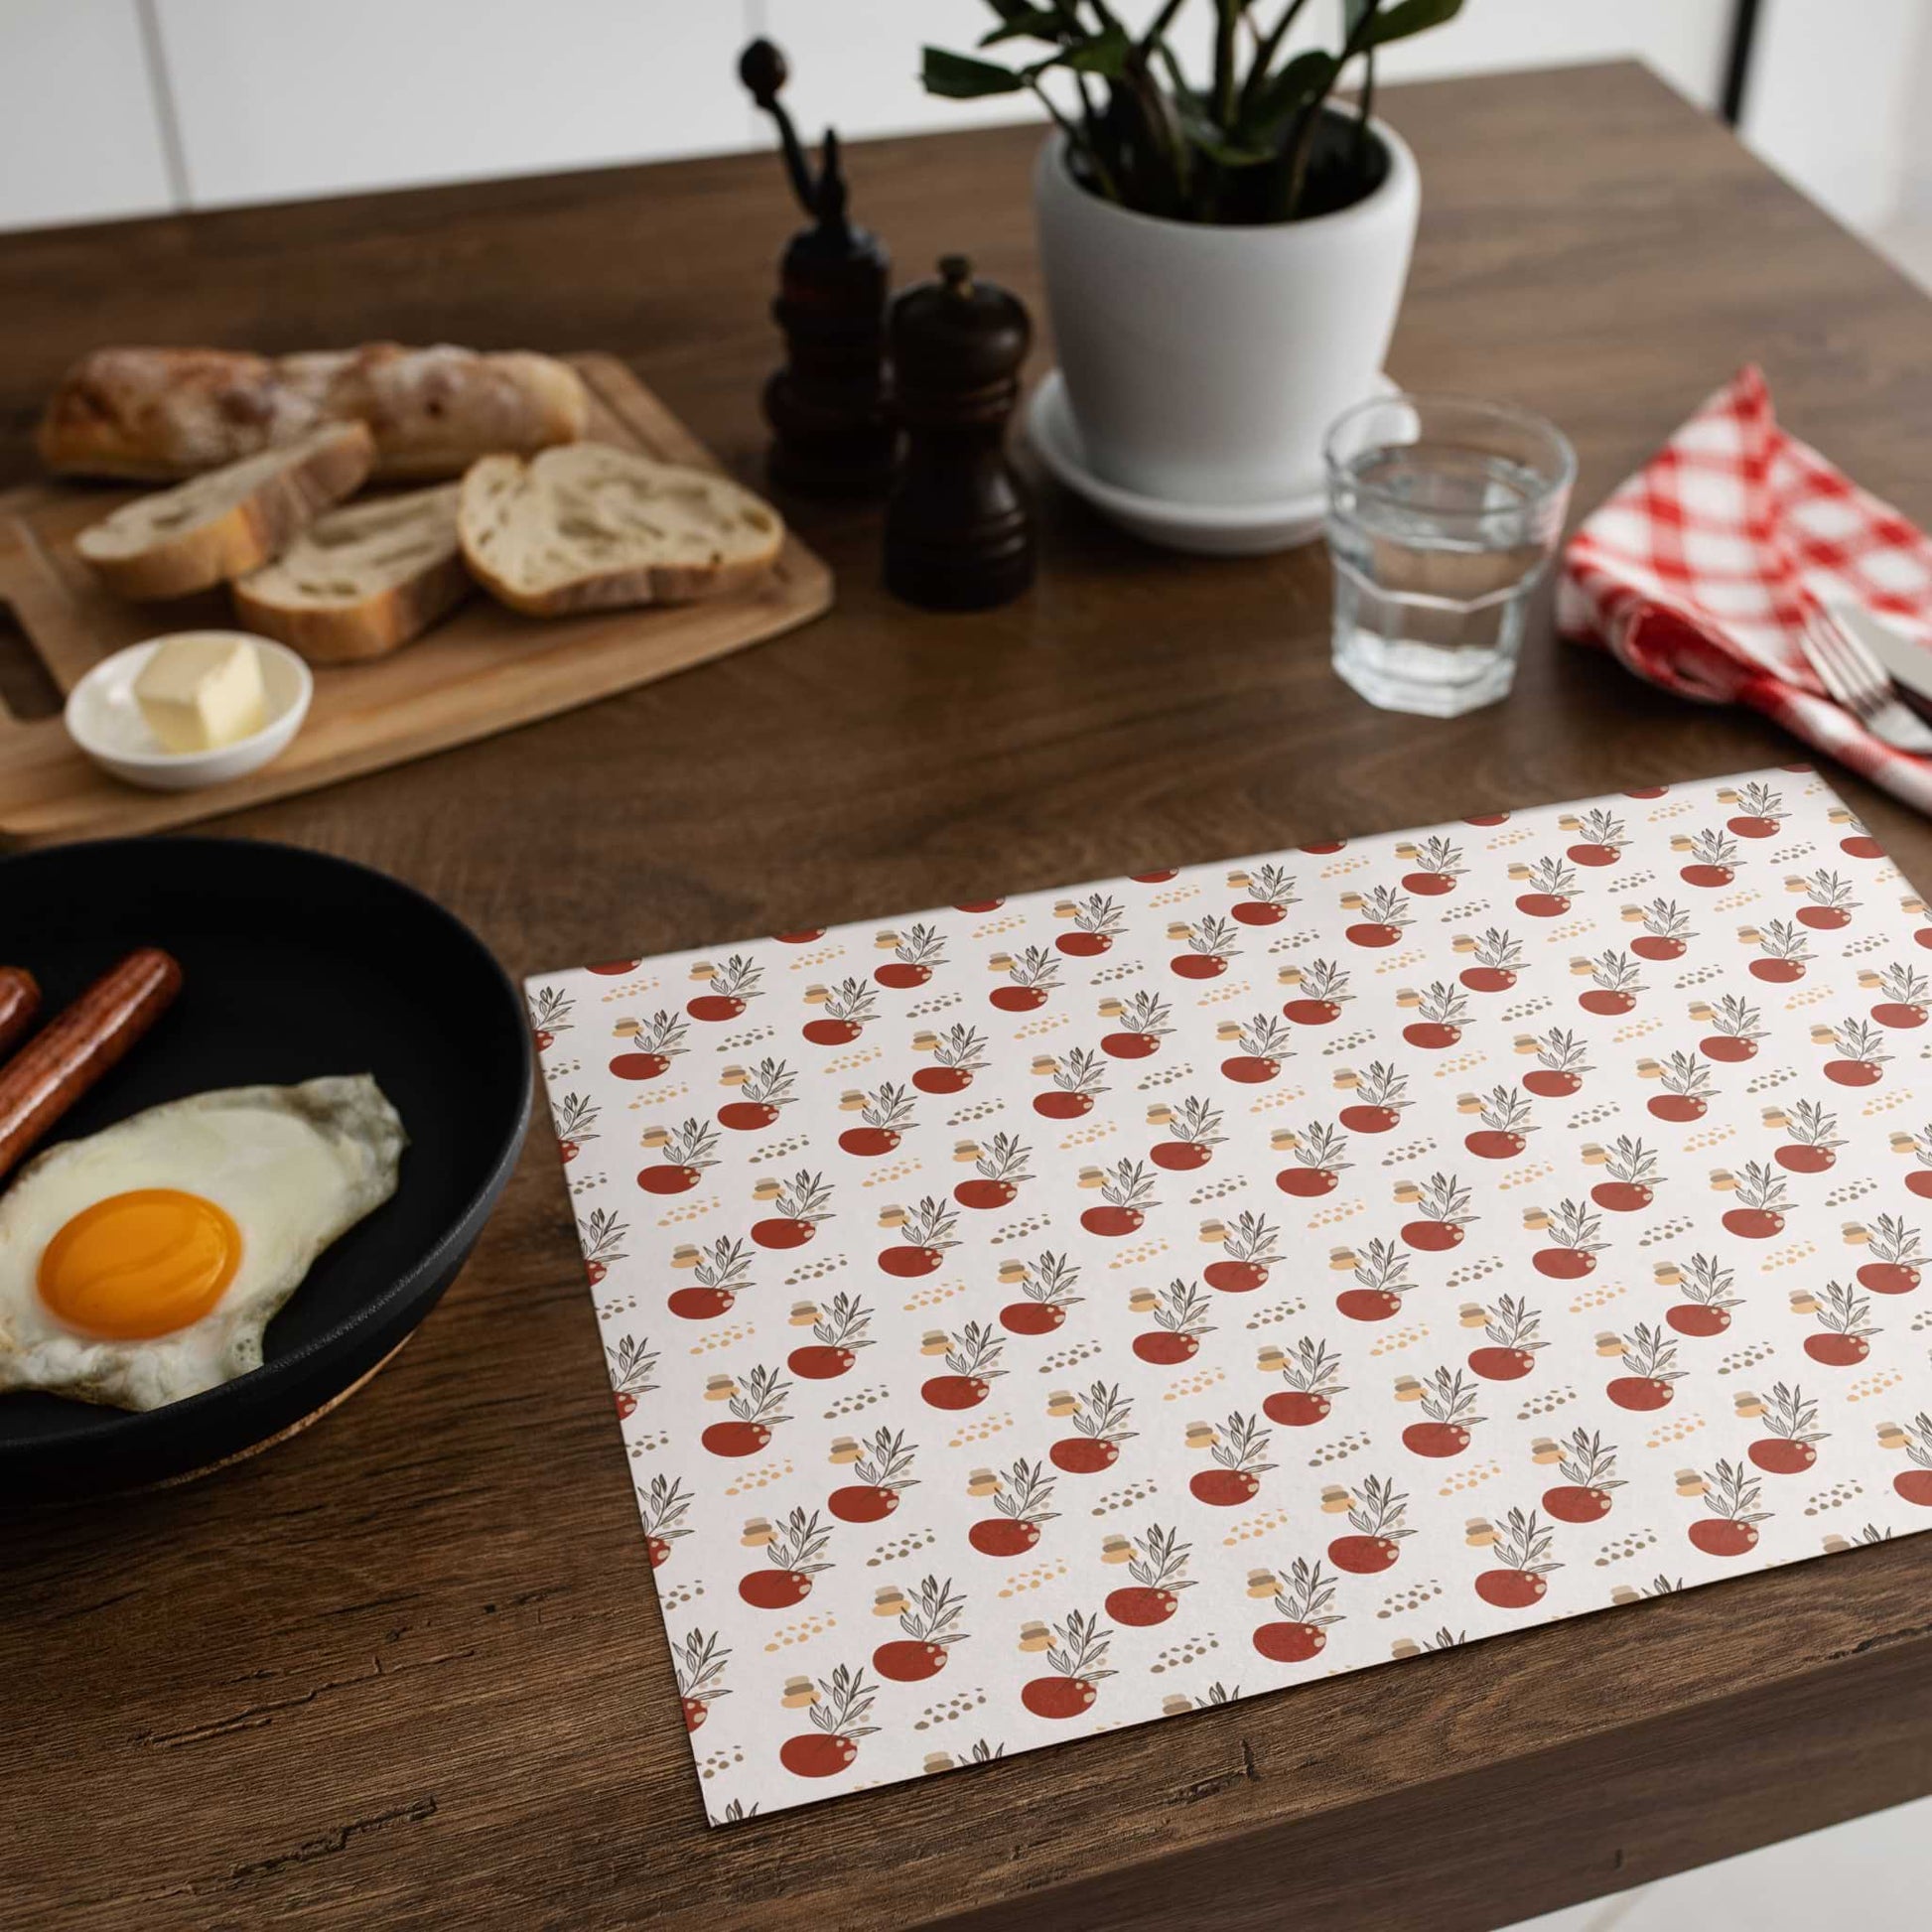 Infinite Red Boho Placemat - ZumBuys